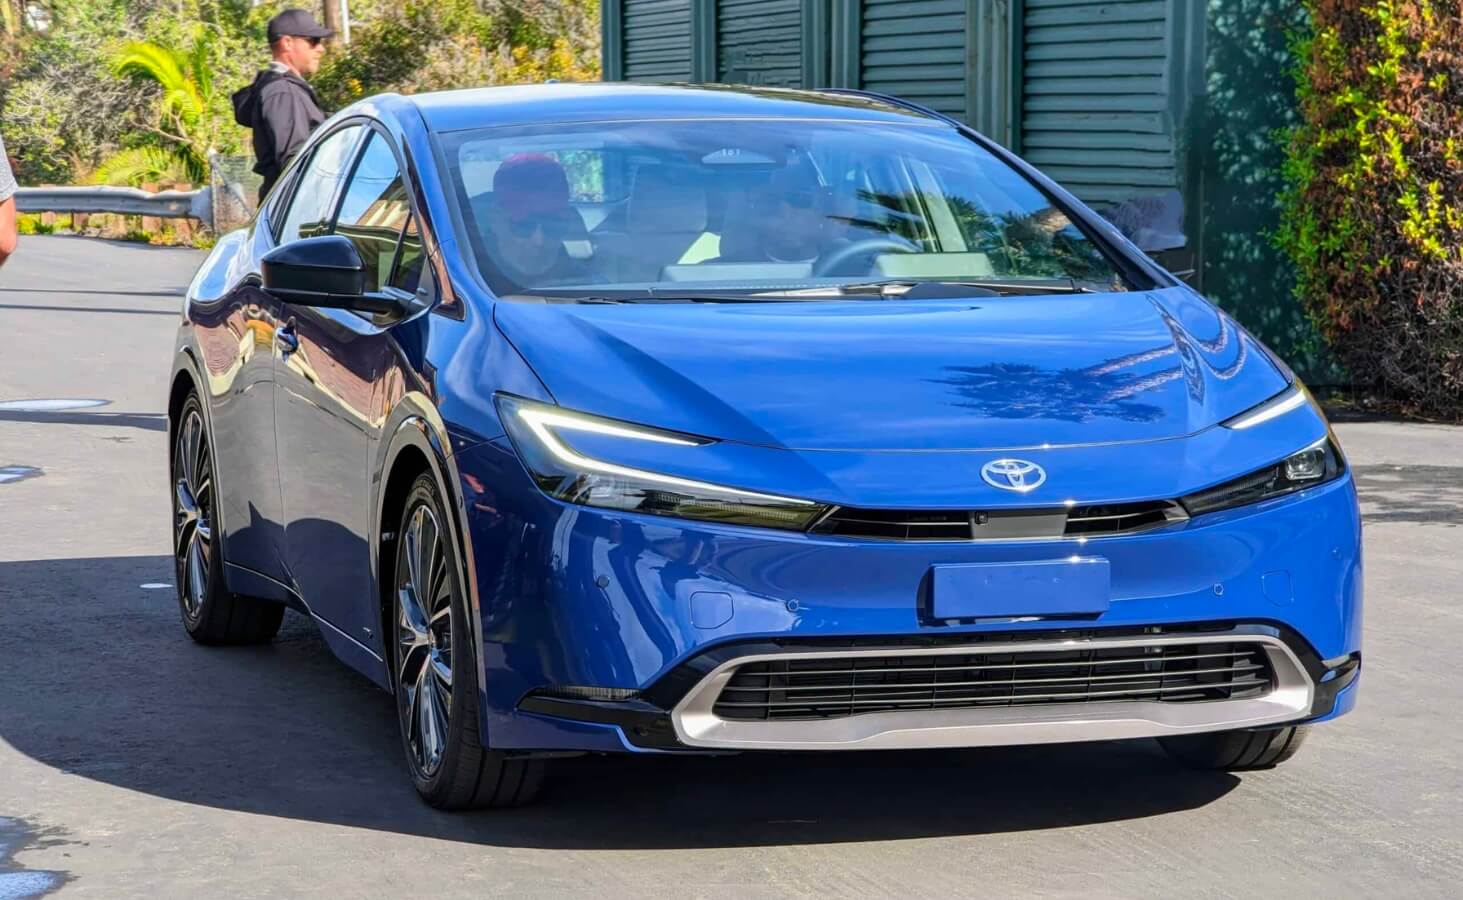 Toyotas 10 New Evs Set To Hit The Road By 2026 Including The Iconic